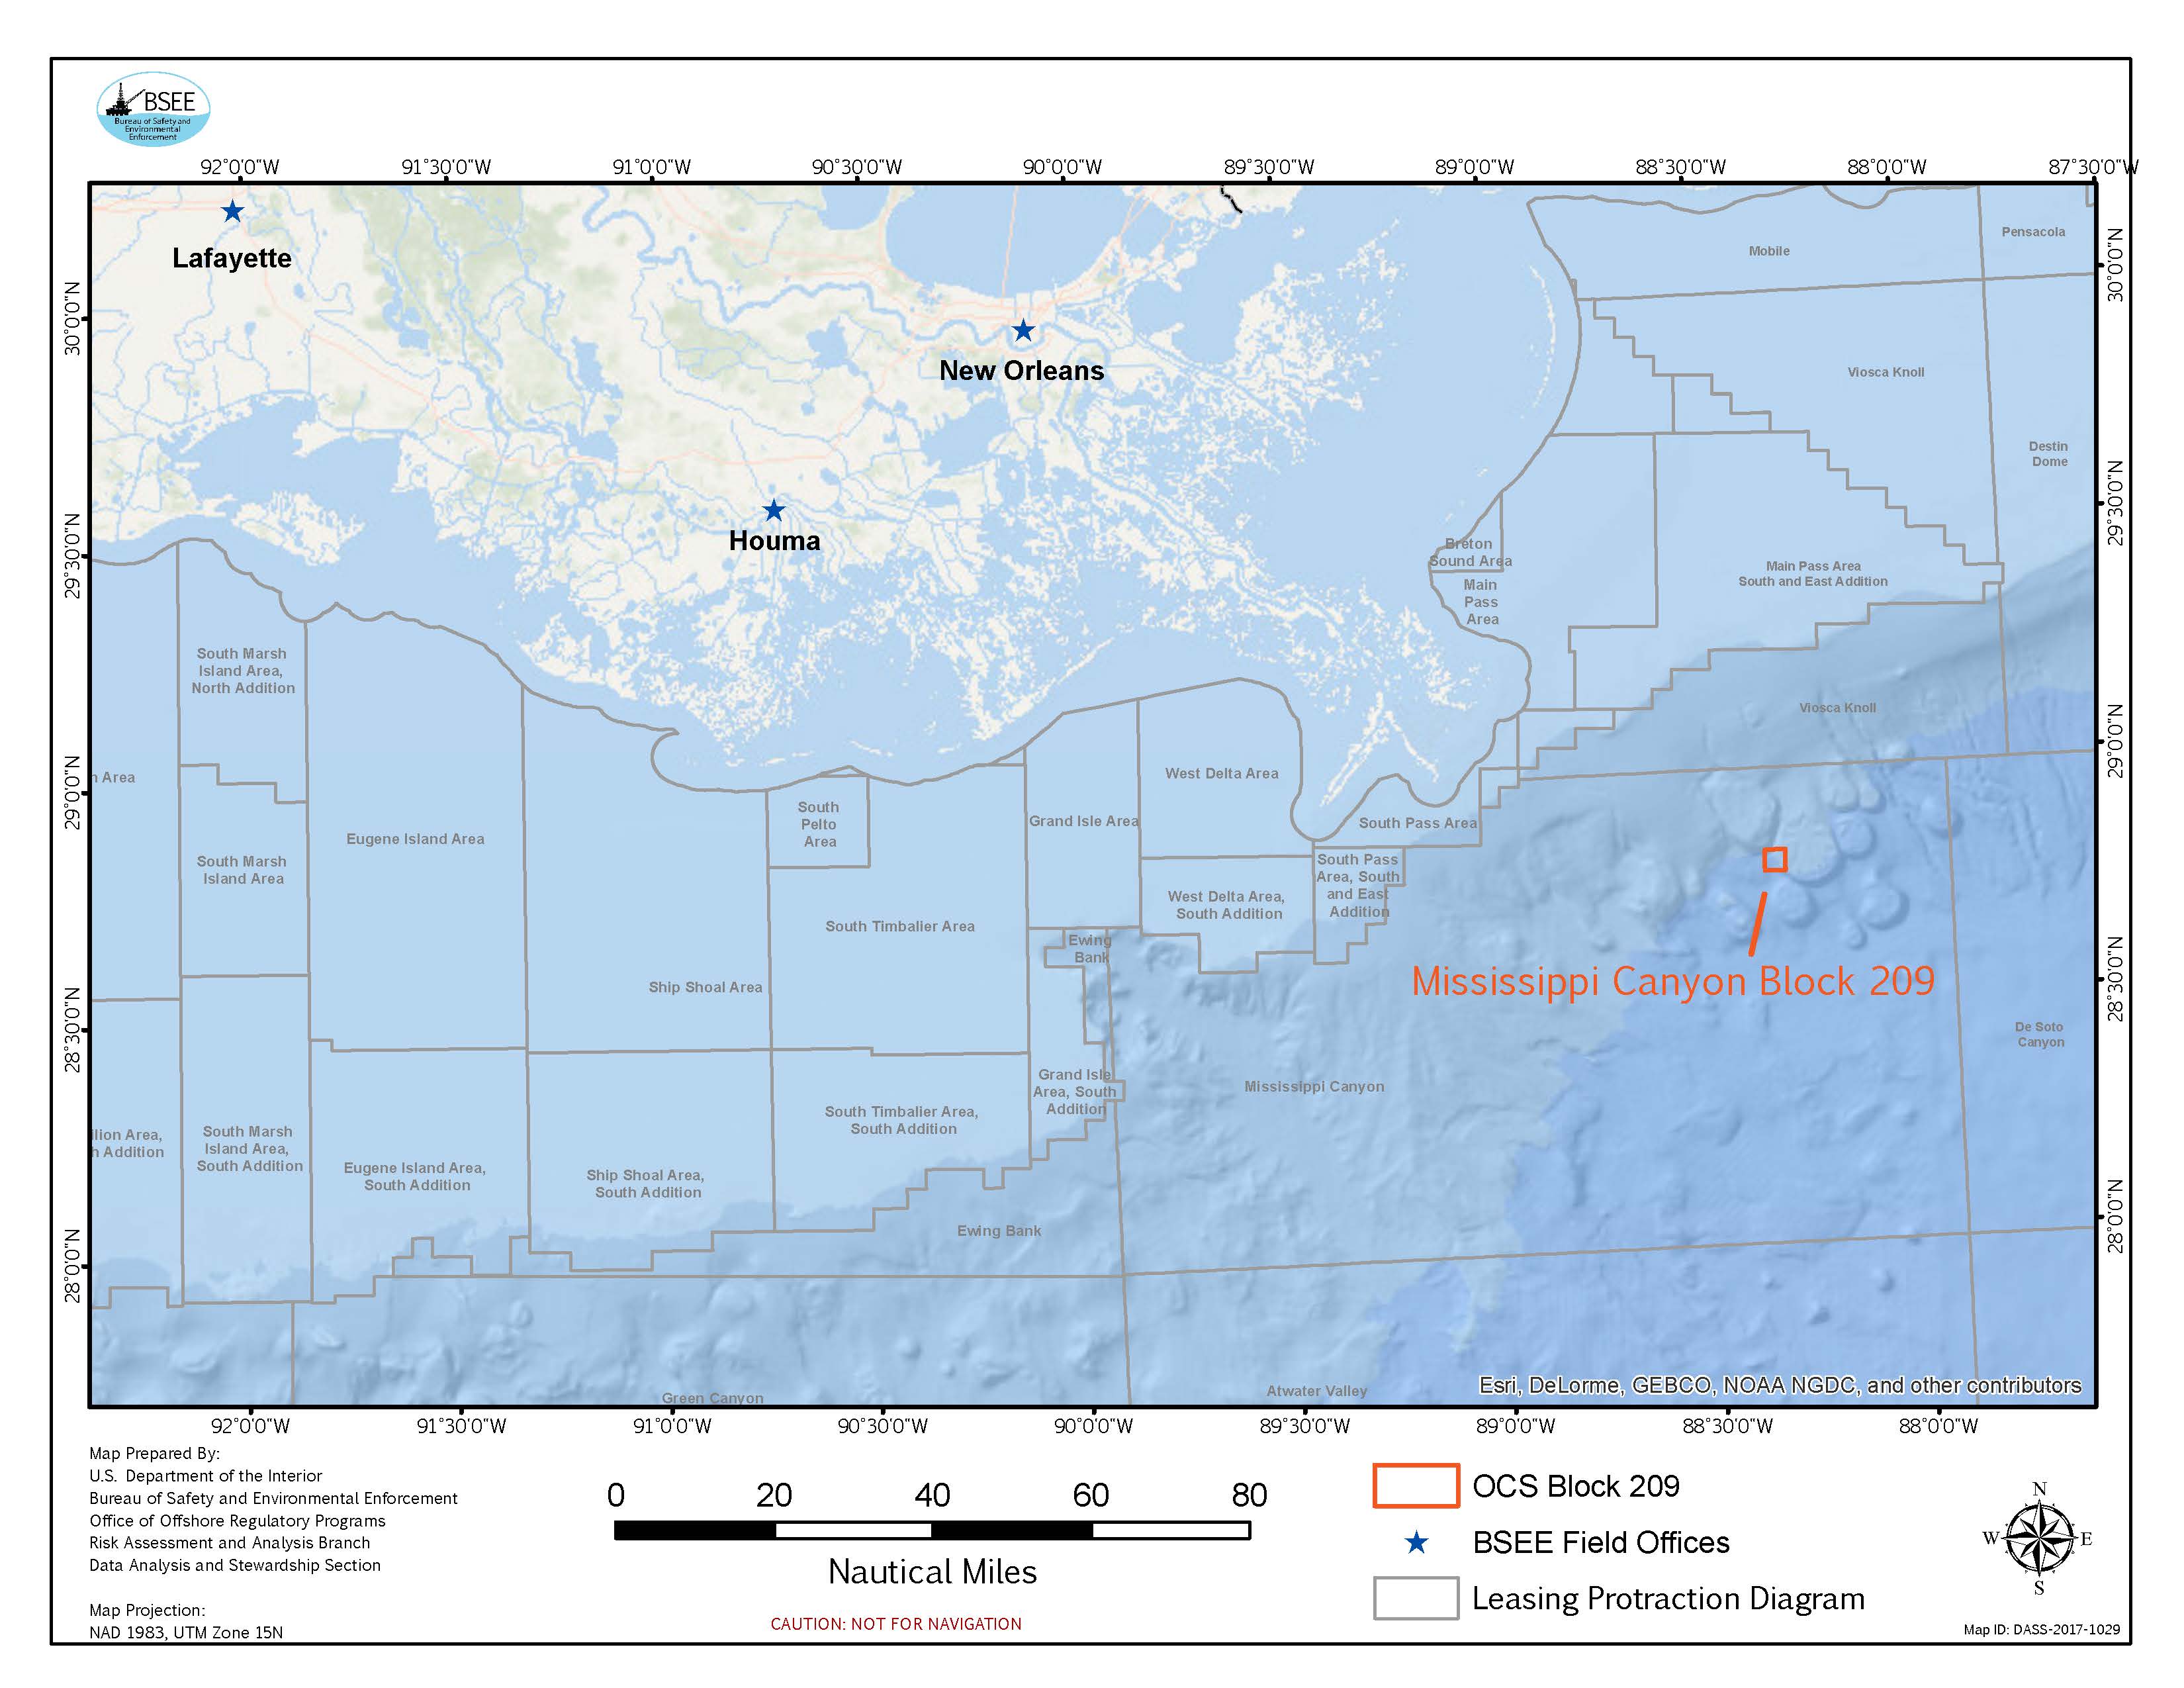 a map of the Gulf of Mexico shows the location of the oil spill 